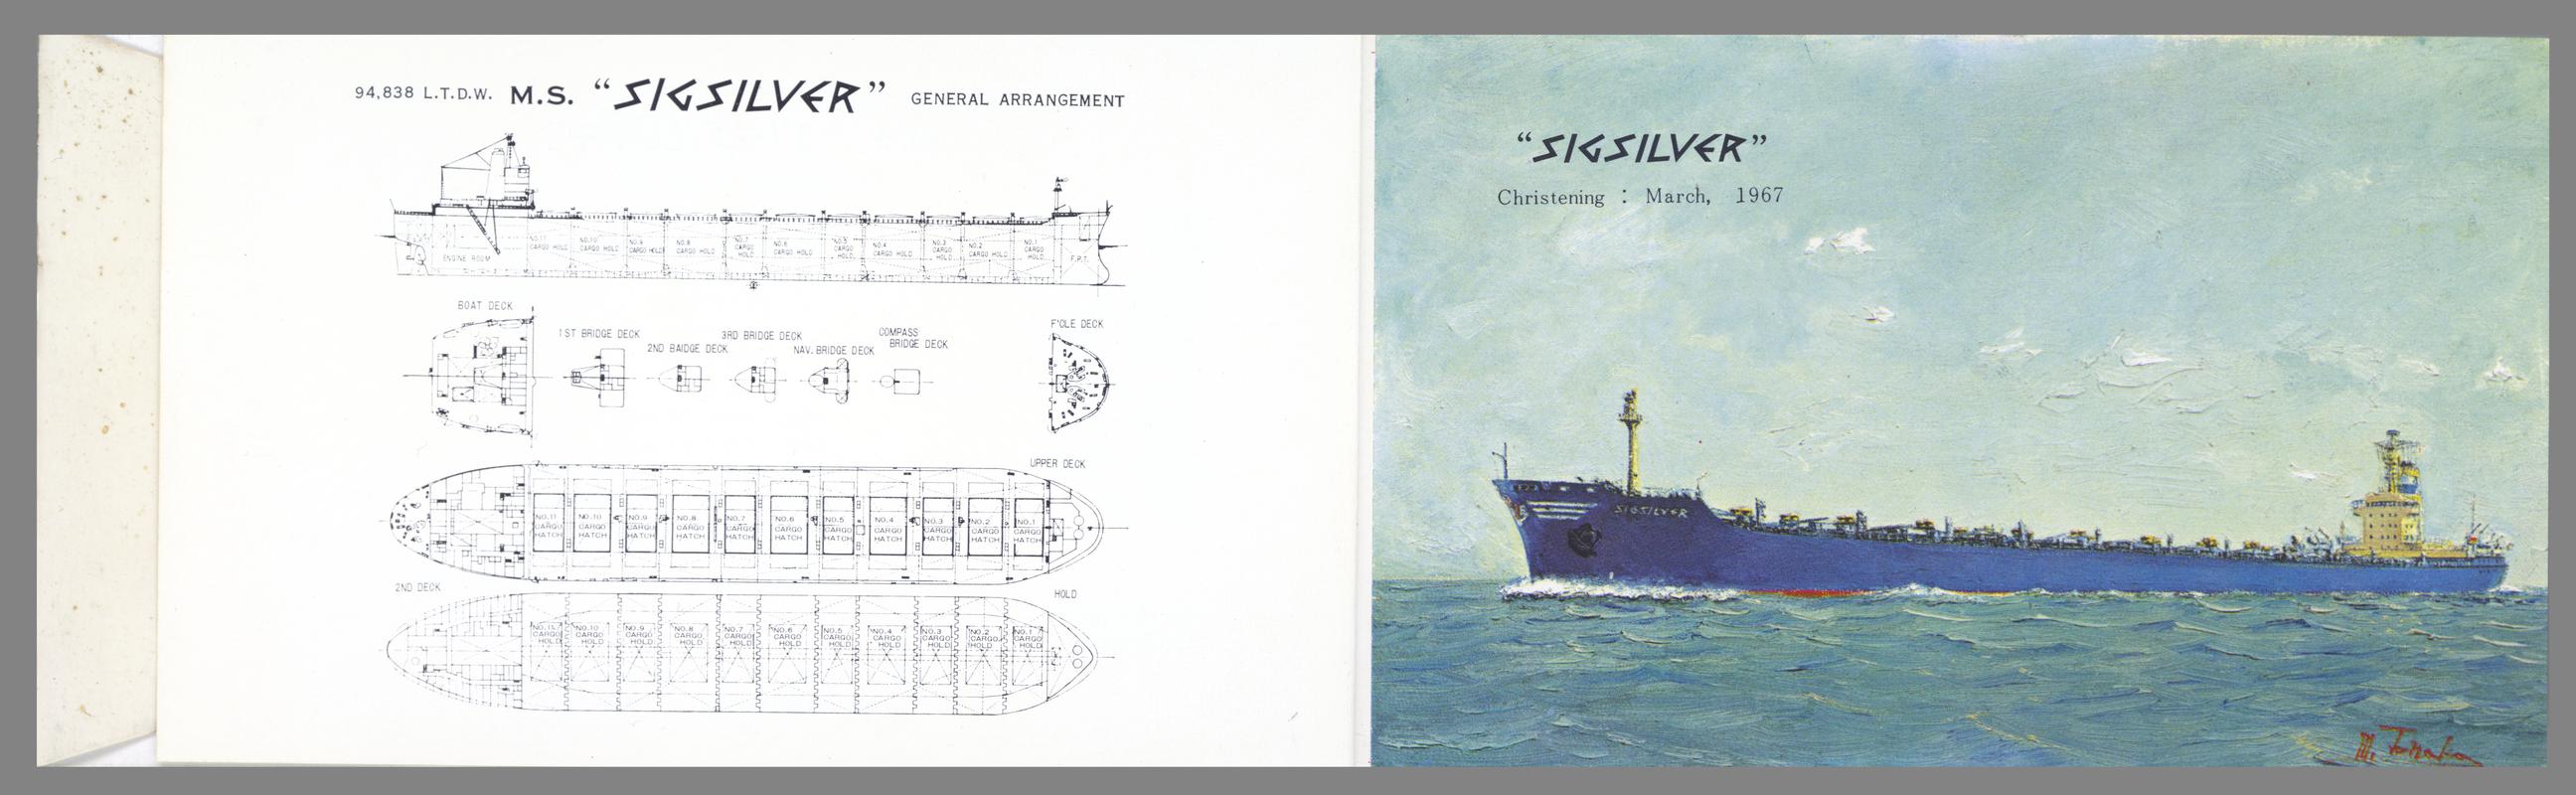 Launch card for the M.V. SIGSILVER In commemoration of christening for Messr. Silver Line Limited, March, 1967. Sigsilver.